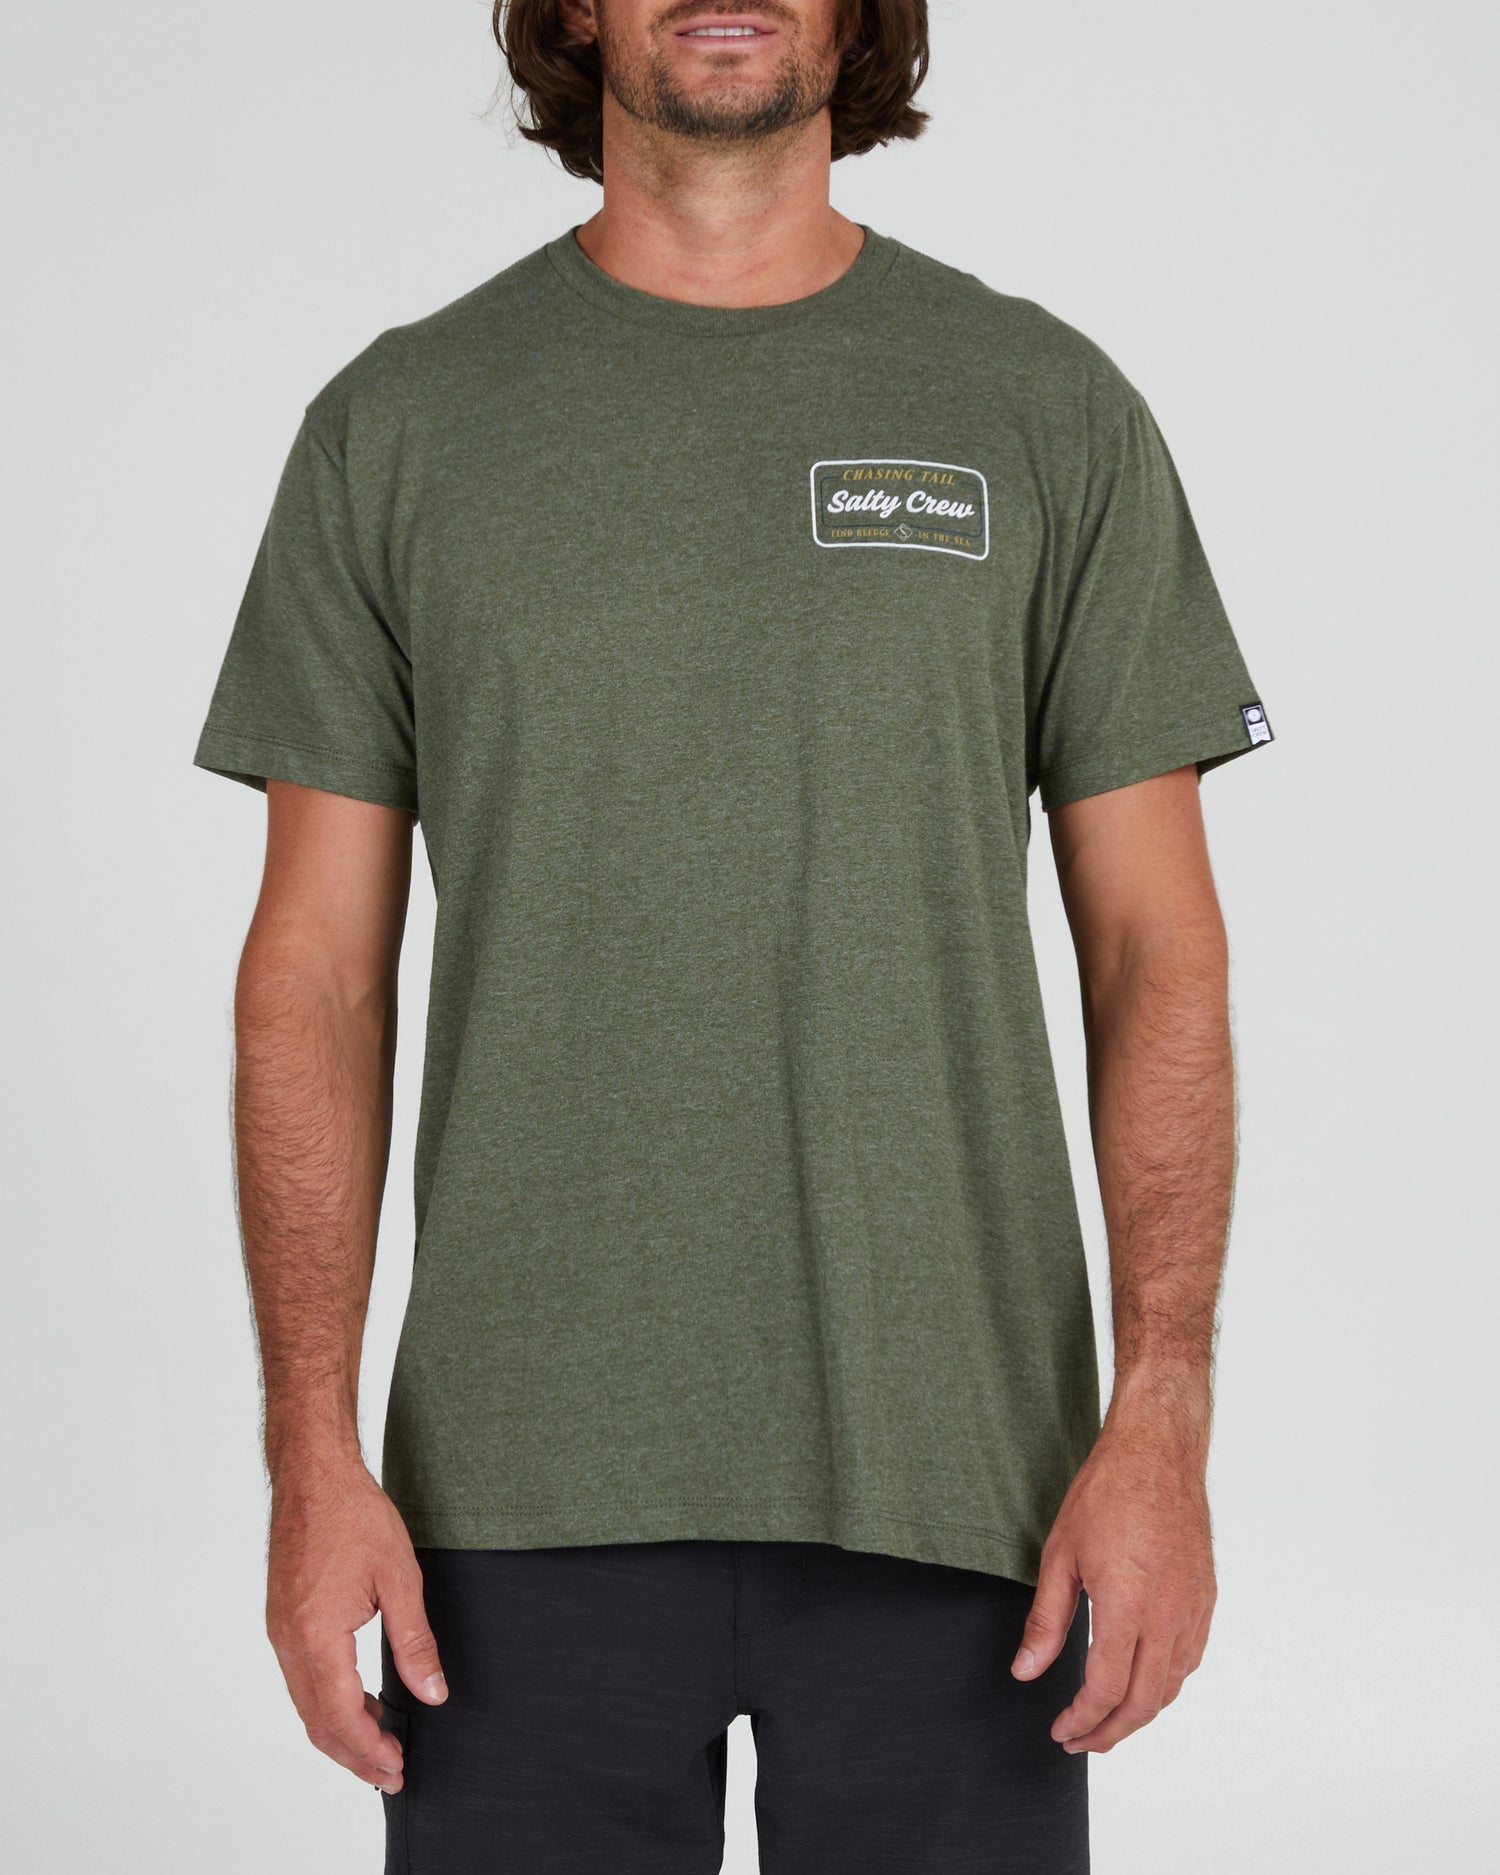 On body front of the Marina Forest Heather S/S Standard Tee